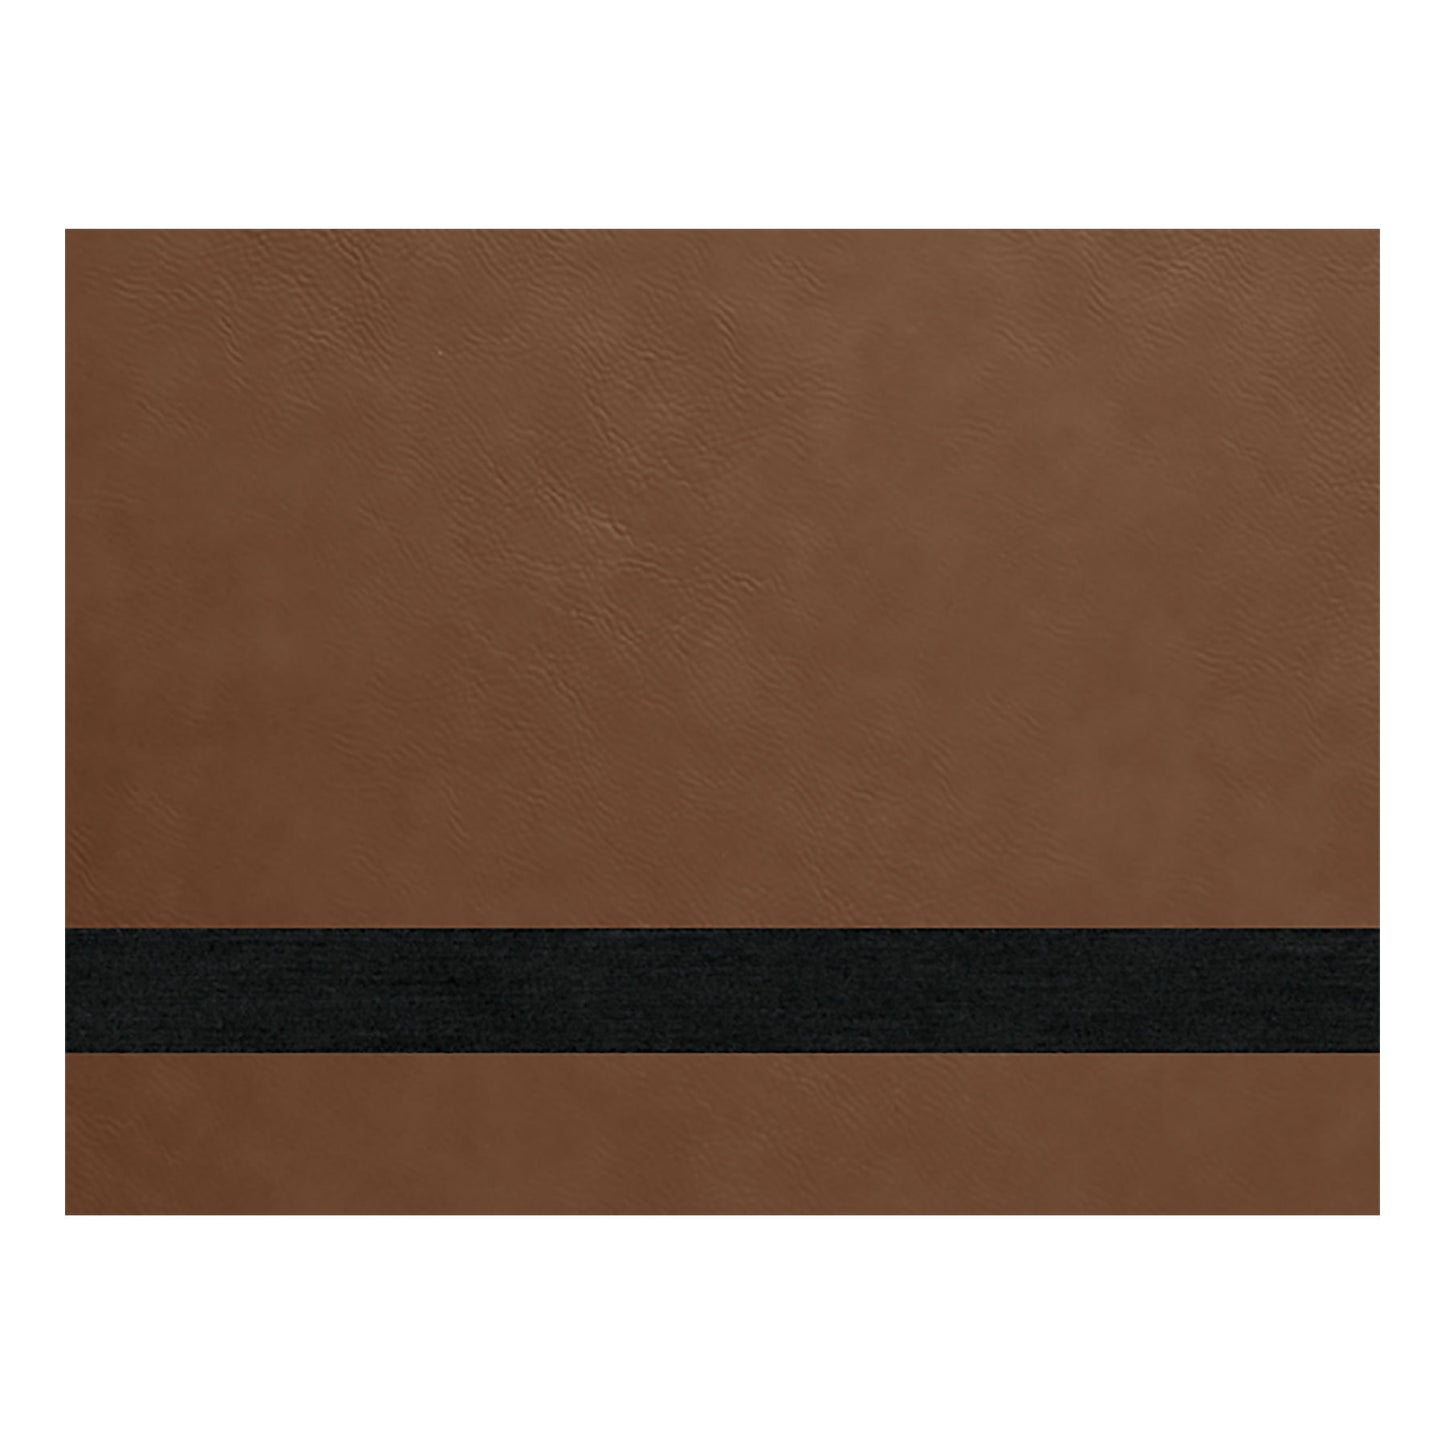 Leather Sheets for Laser Engraving, Laserable Leatherette 12 x 24, Laser  Engraving Supplies, for Glowforge FSL Supplies and Materials